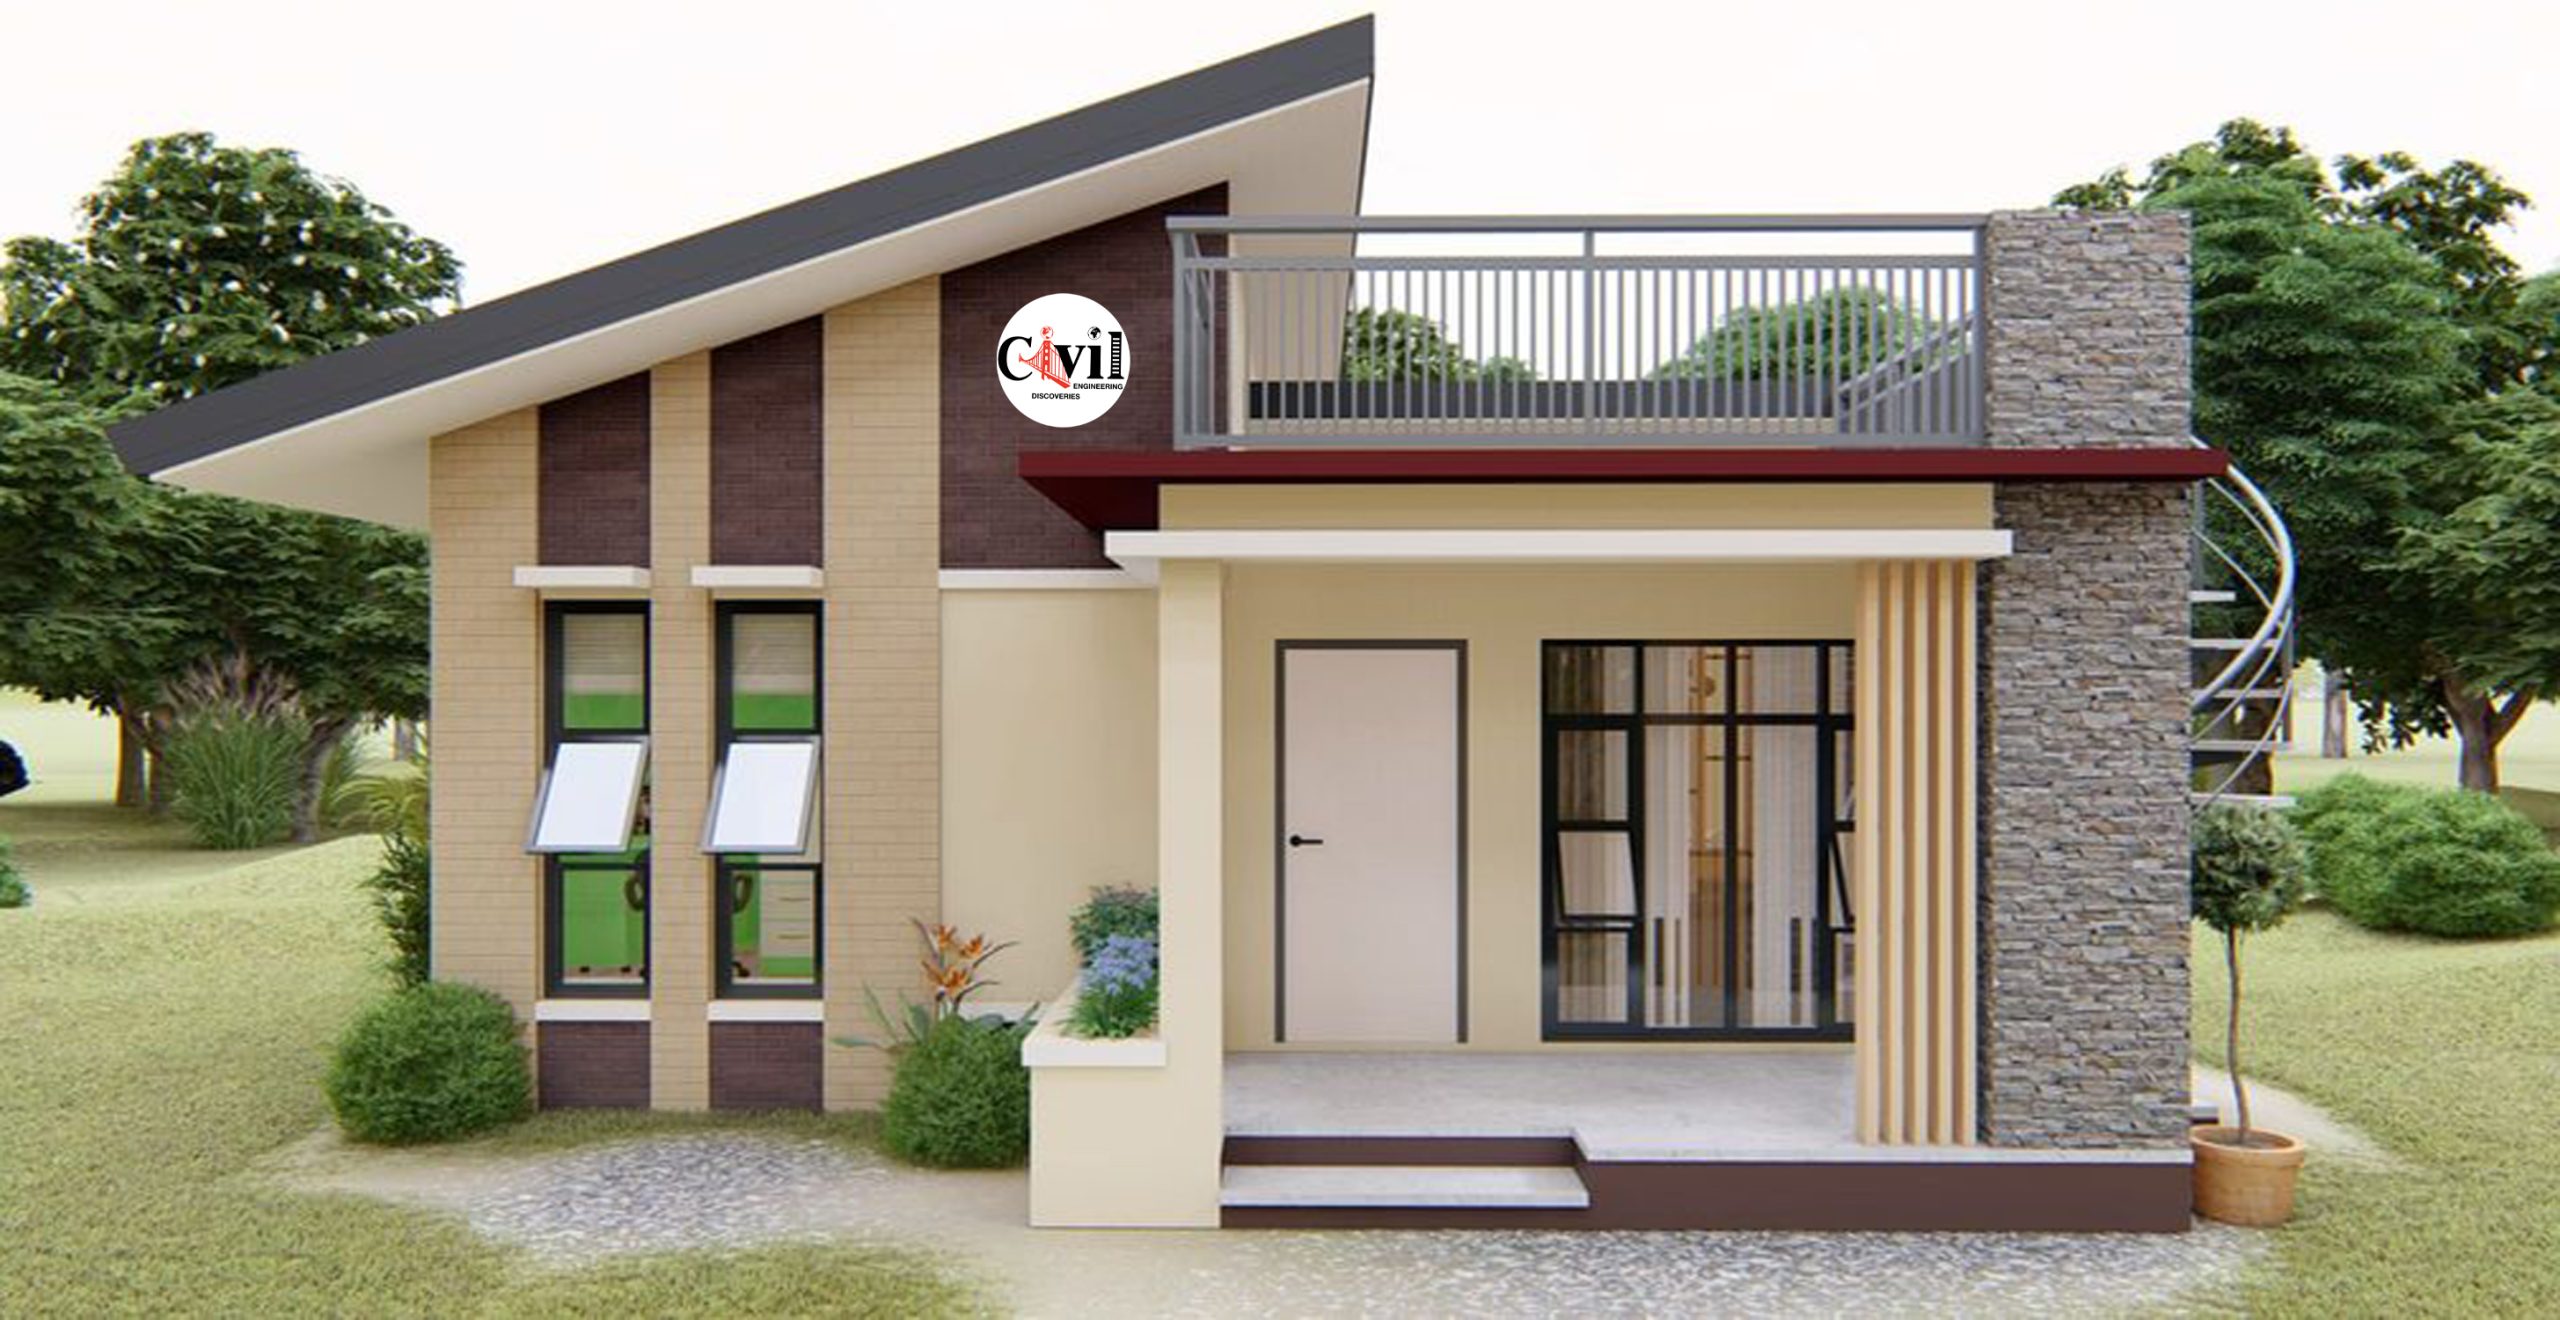 80 SQ.M. Modern Bungalow House Design With Roof Deck Scaled 